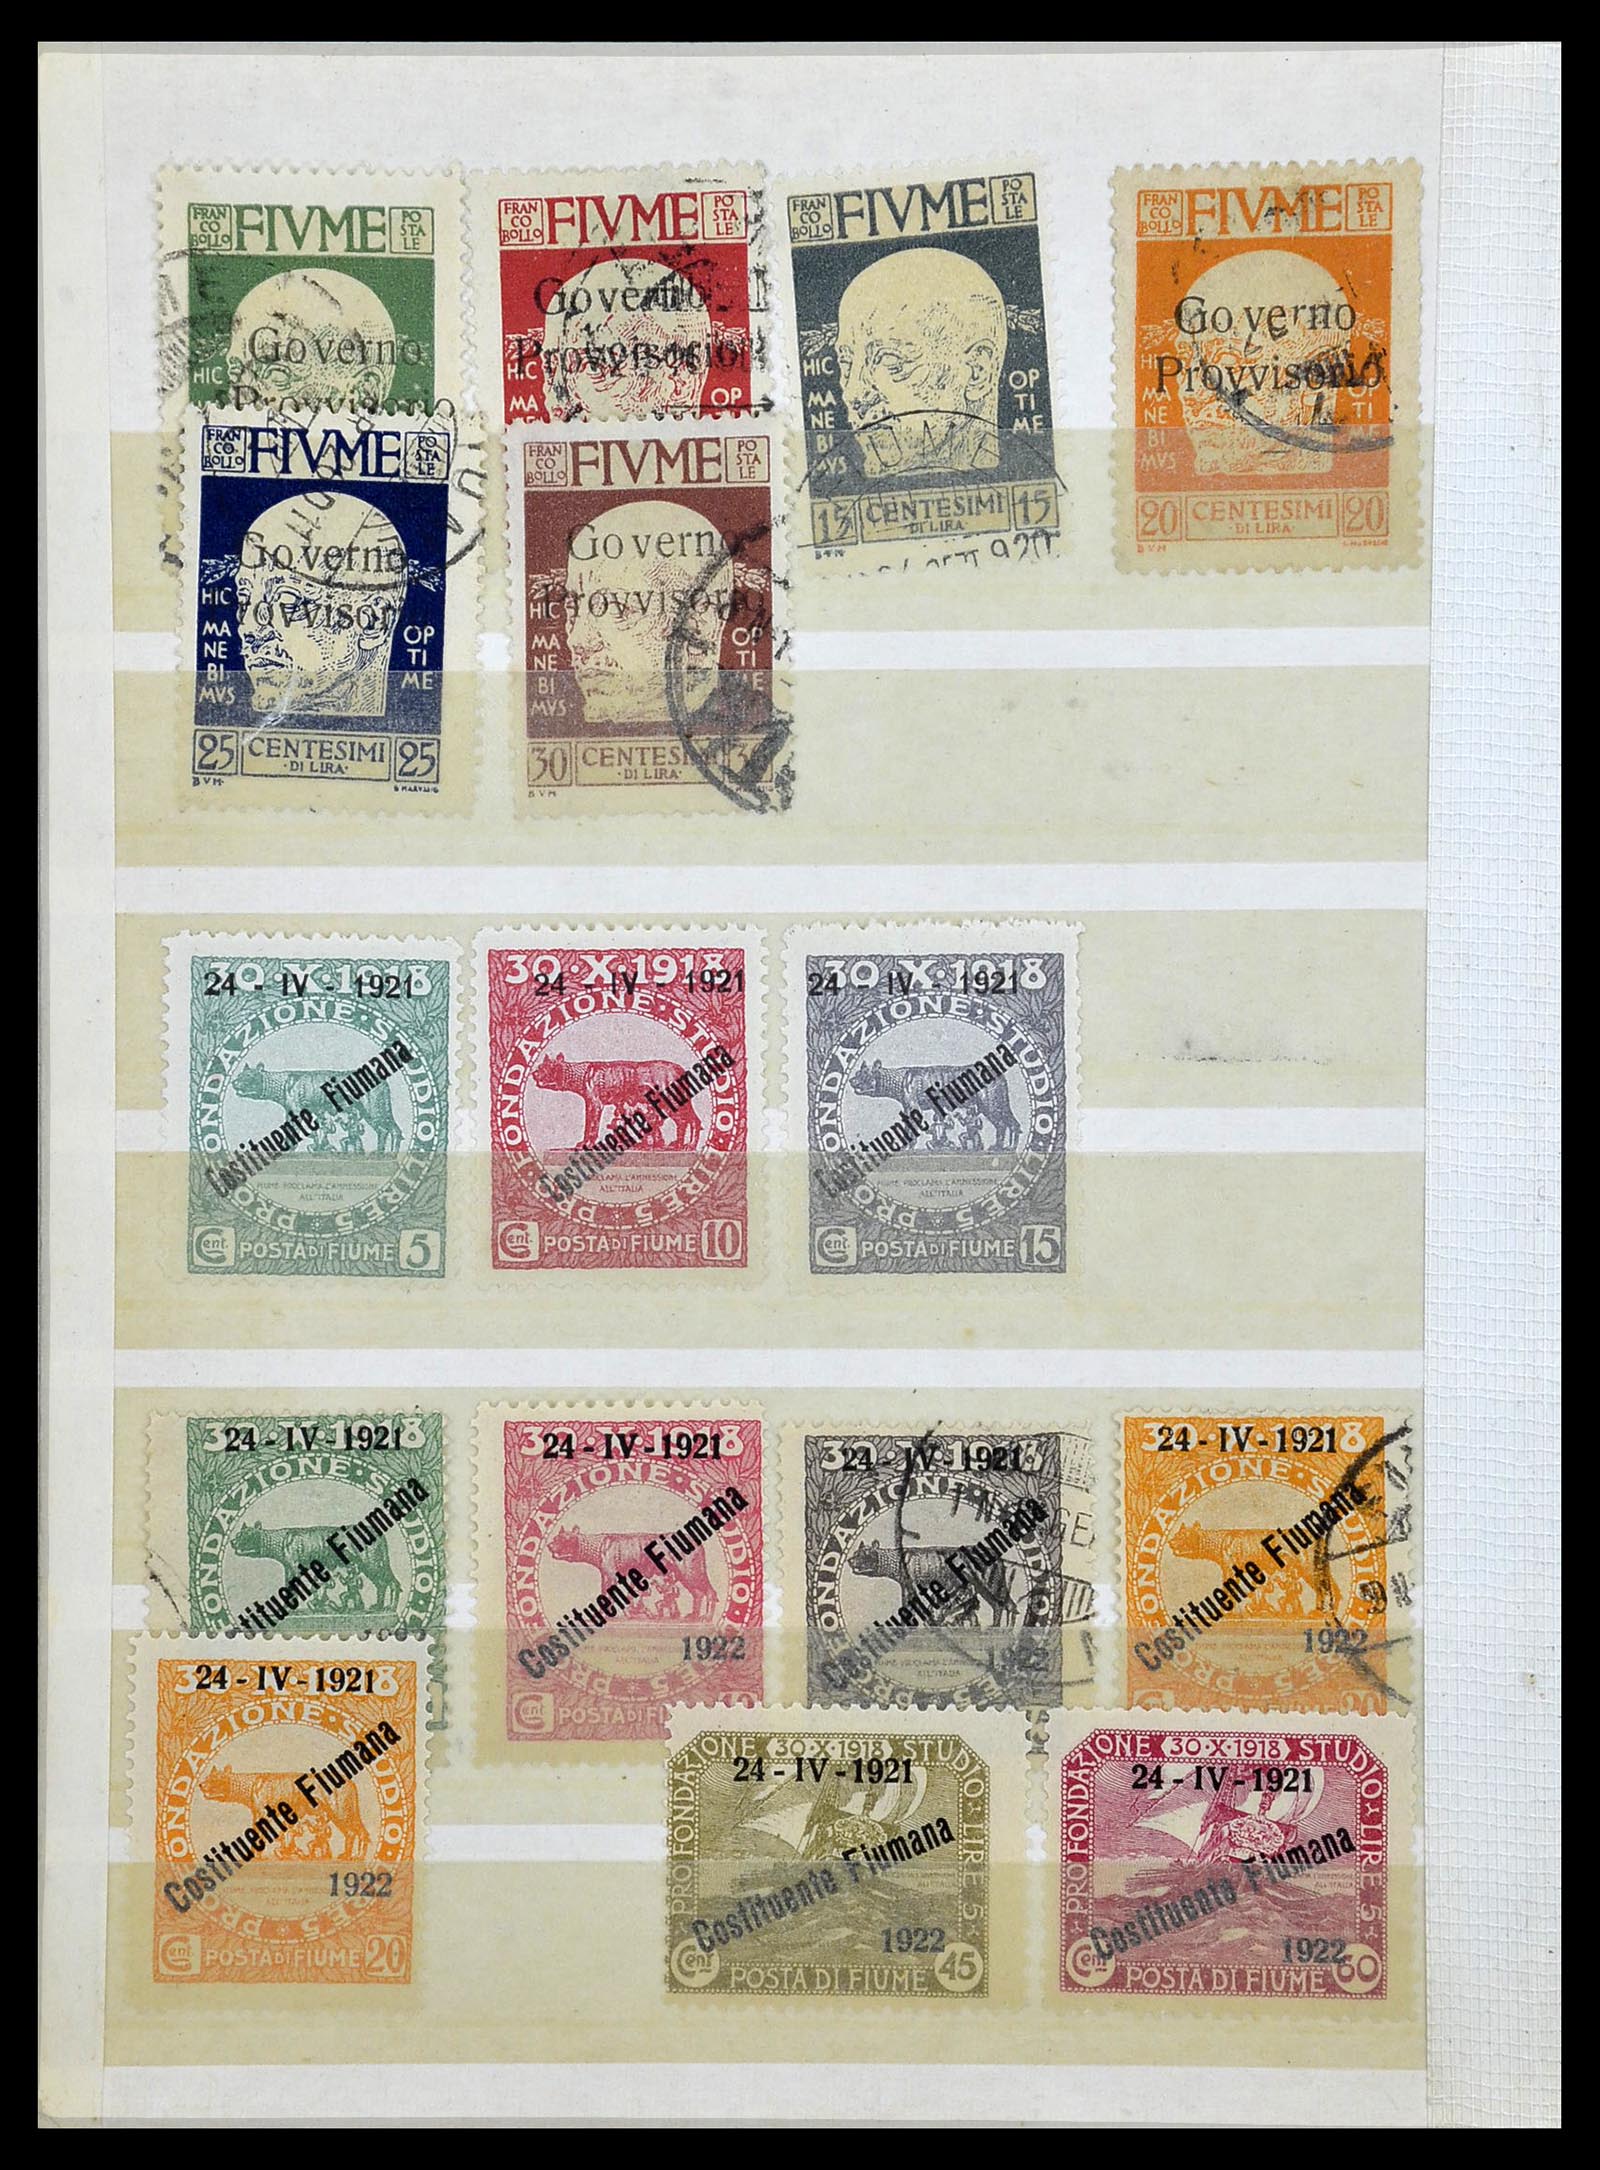 33619 050 - Stamp collection 33619 Italian territories/occupation/colonies 1874-1945